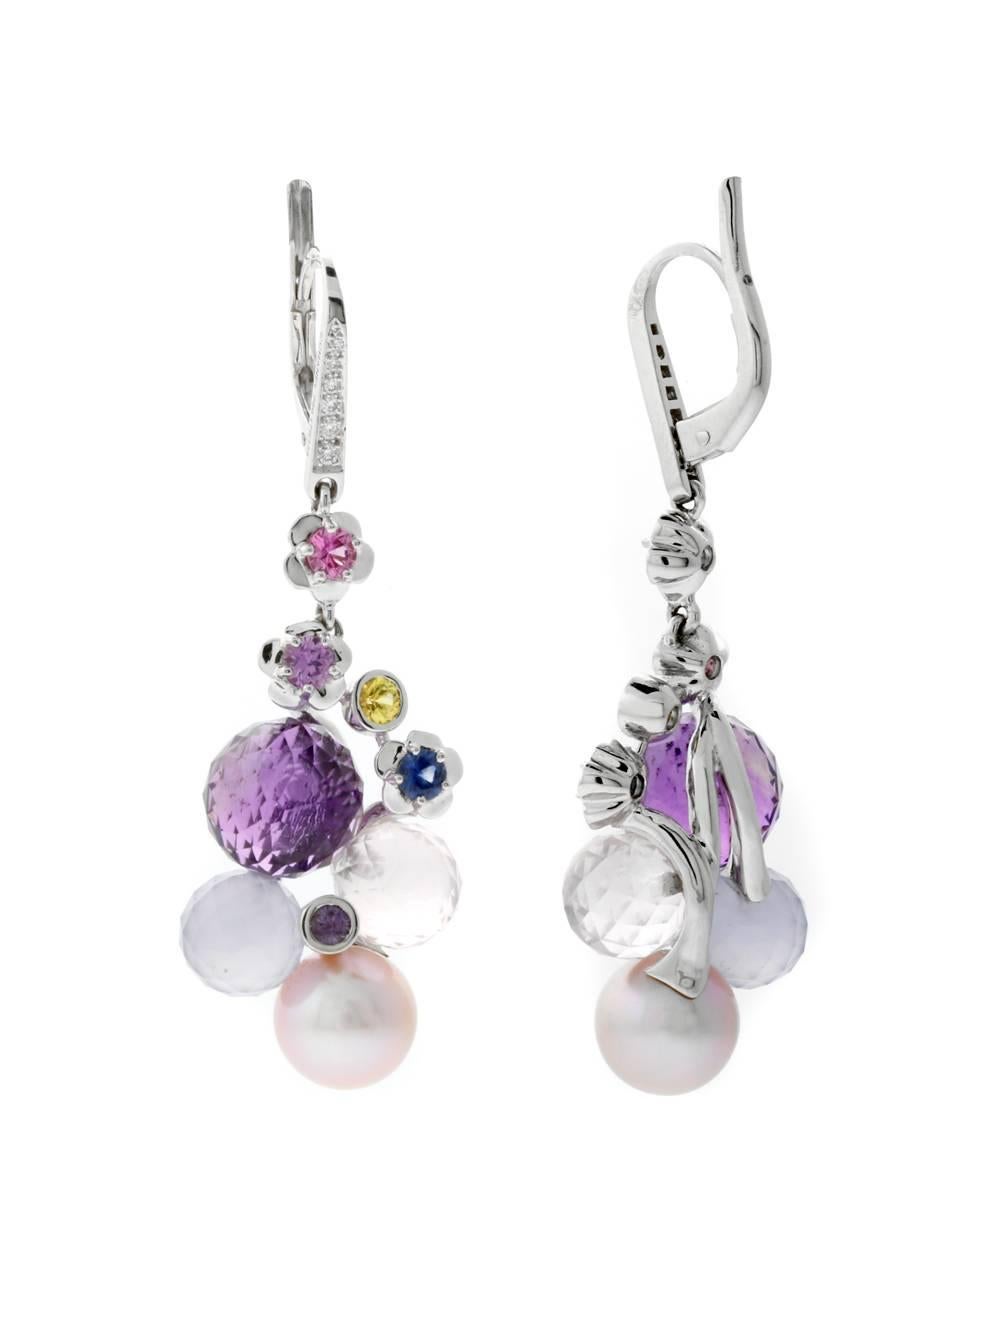 These magnificent Chanel 18k white gold earrings offer an interesting mixture of textures and shapes. Its larger vibrant presentation will help it get noticed.

Stones: Diamonds, Pearl, Amethyst, Pink, Blue & Yellow Sapphire, Chalcedony

Dimensions: